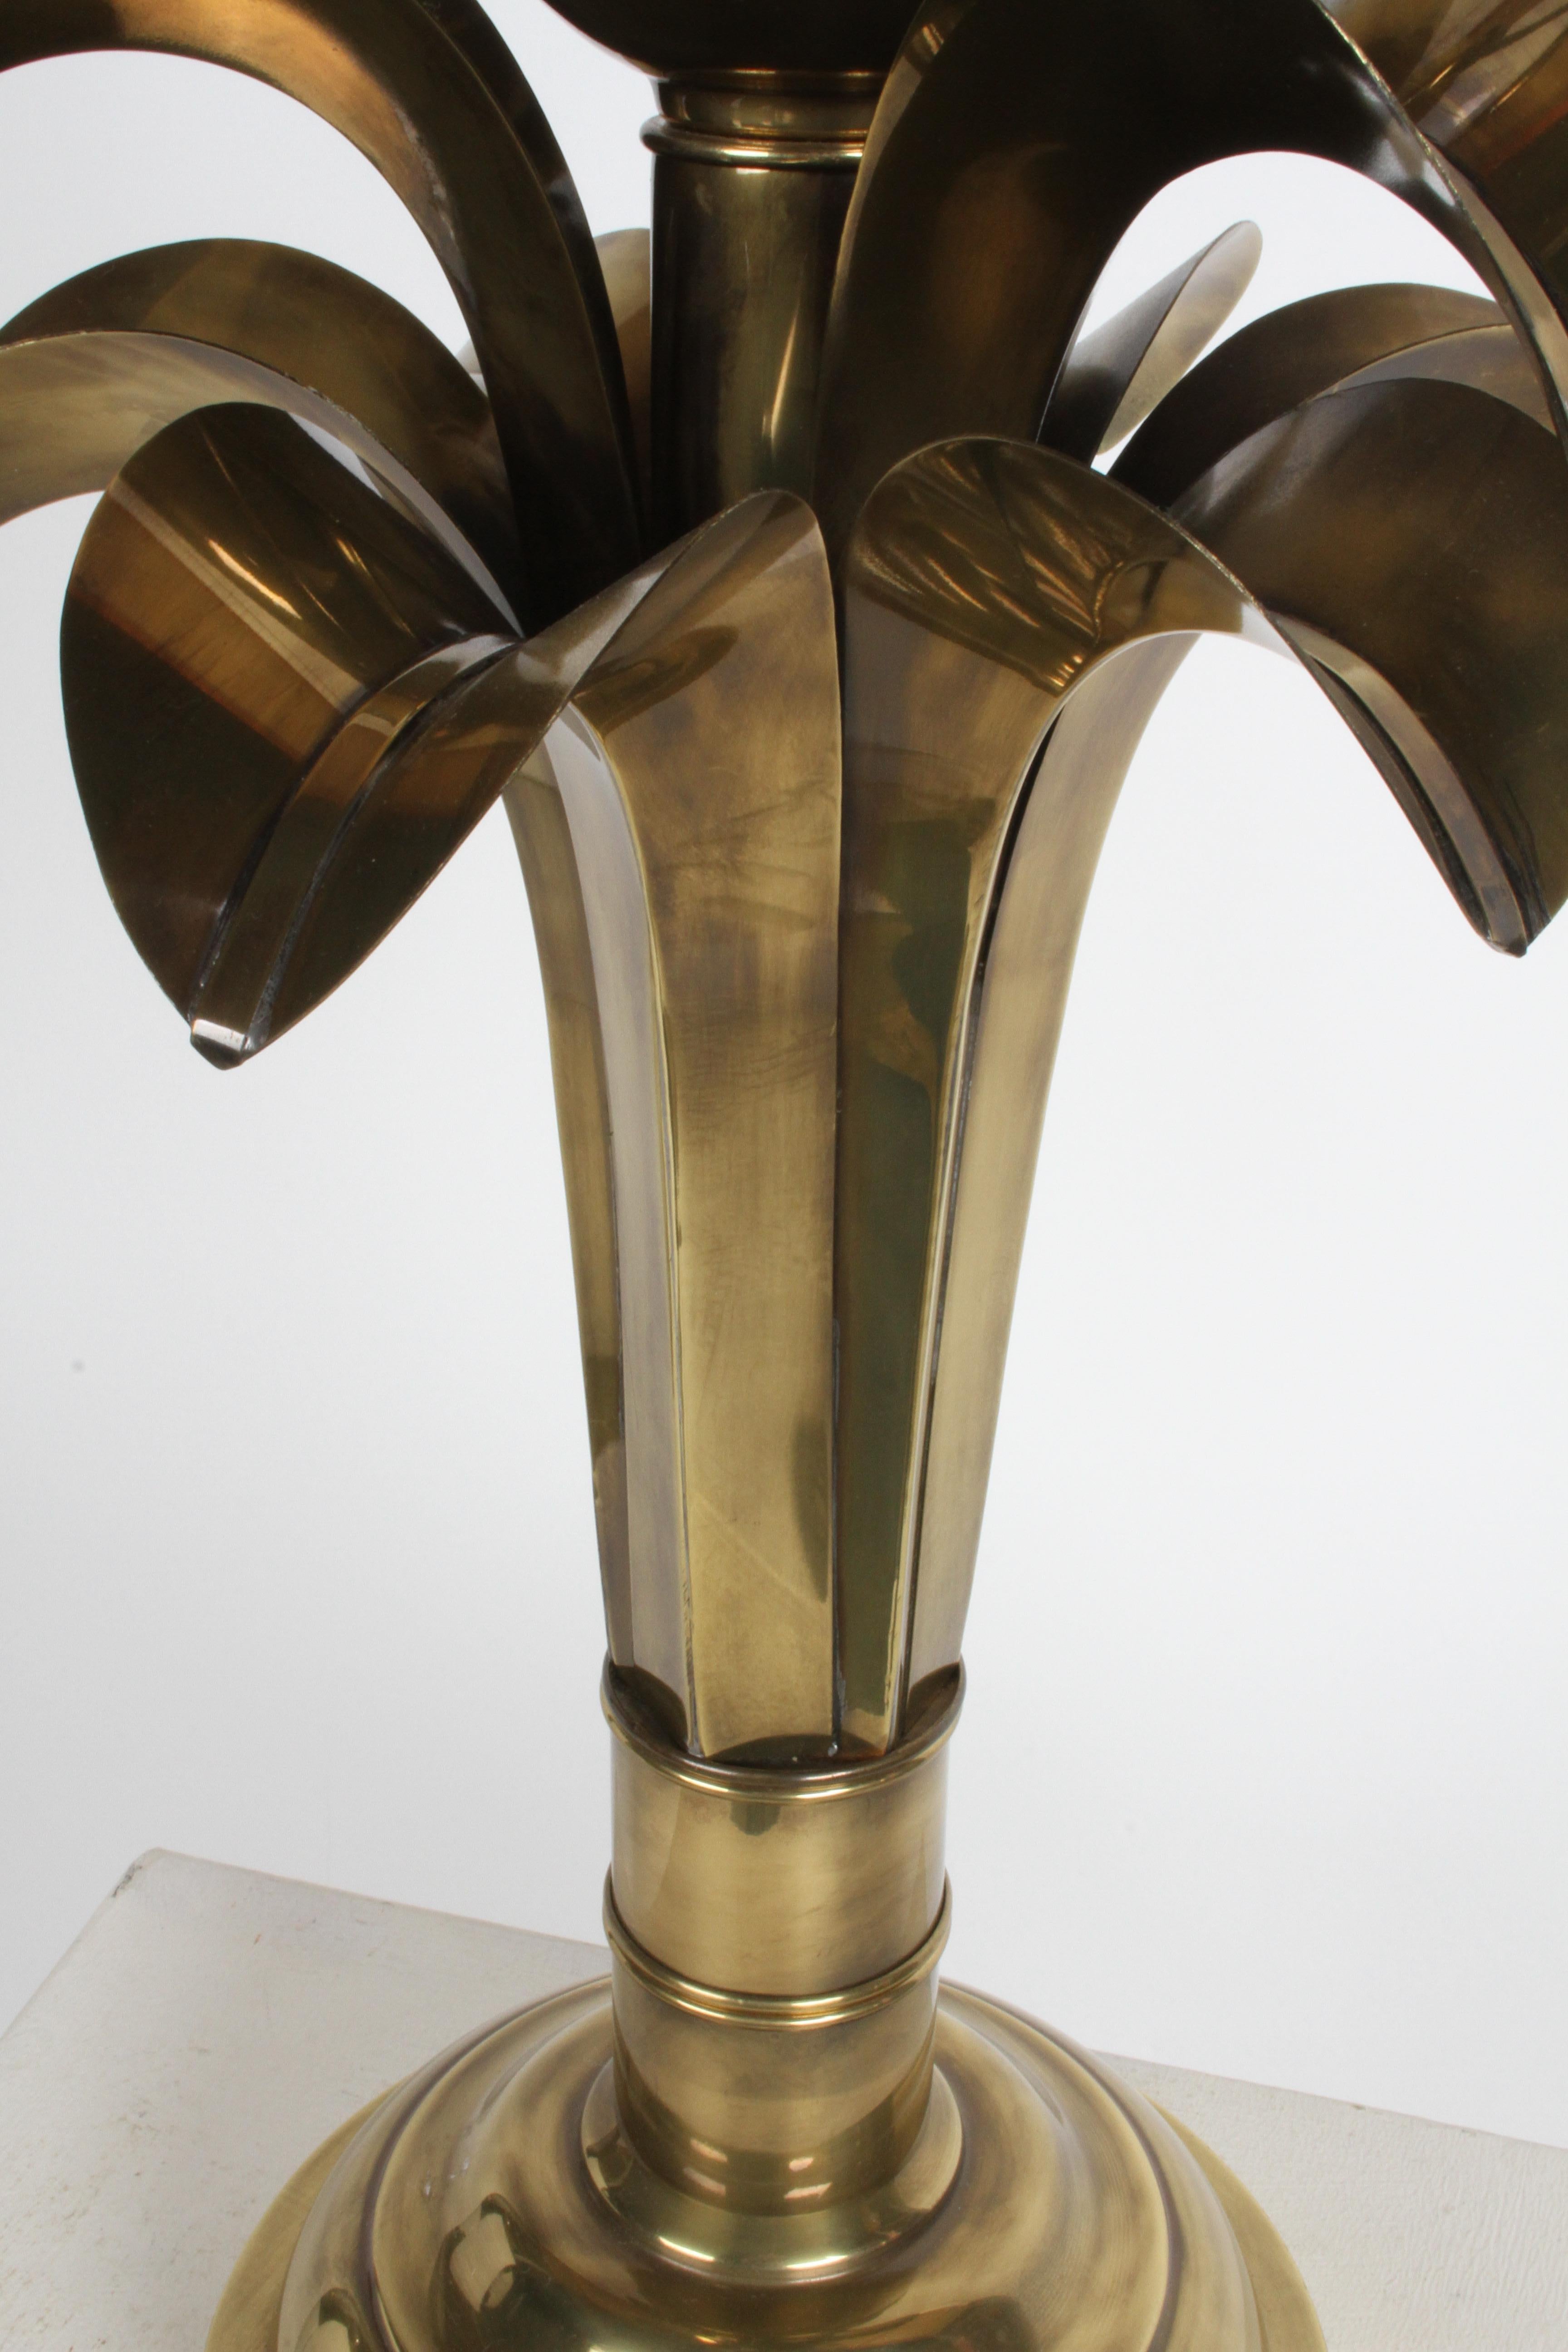 20th Century Hollywood Regency Brass Palm Leaf Tree Lamp circa 1970s by Hart Associates For Sale